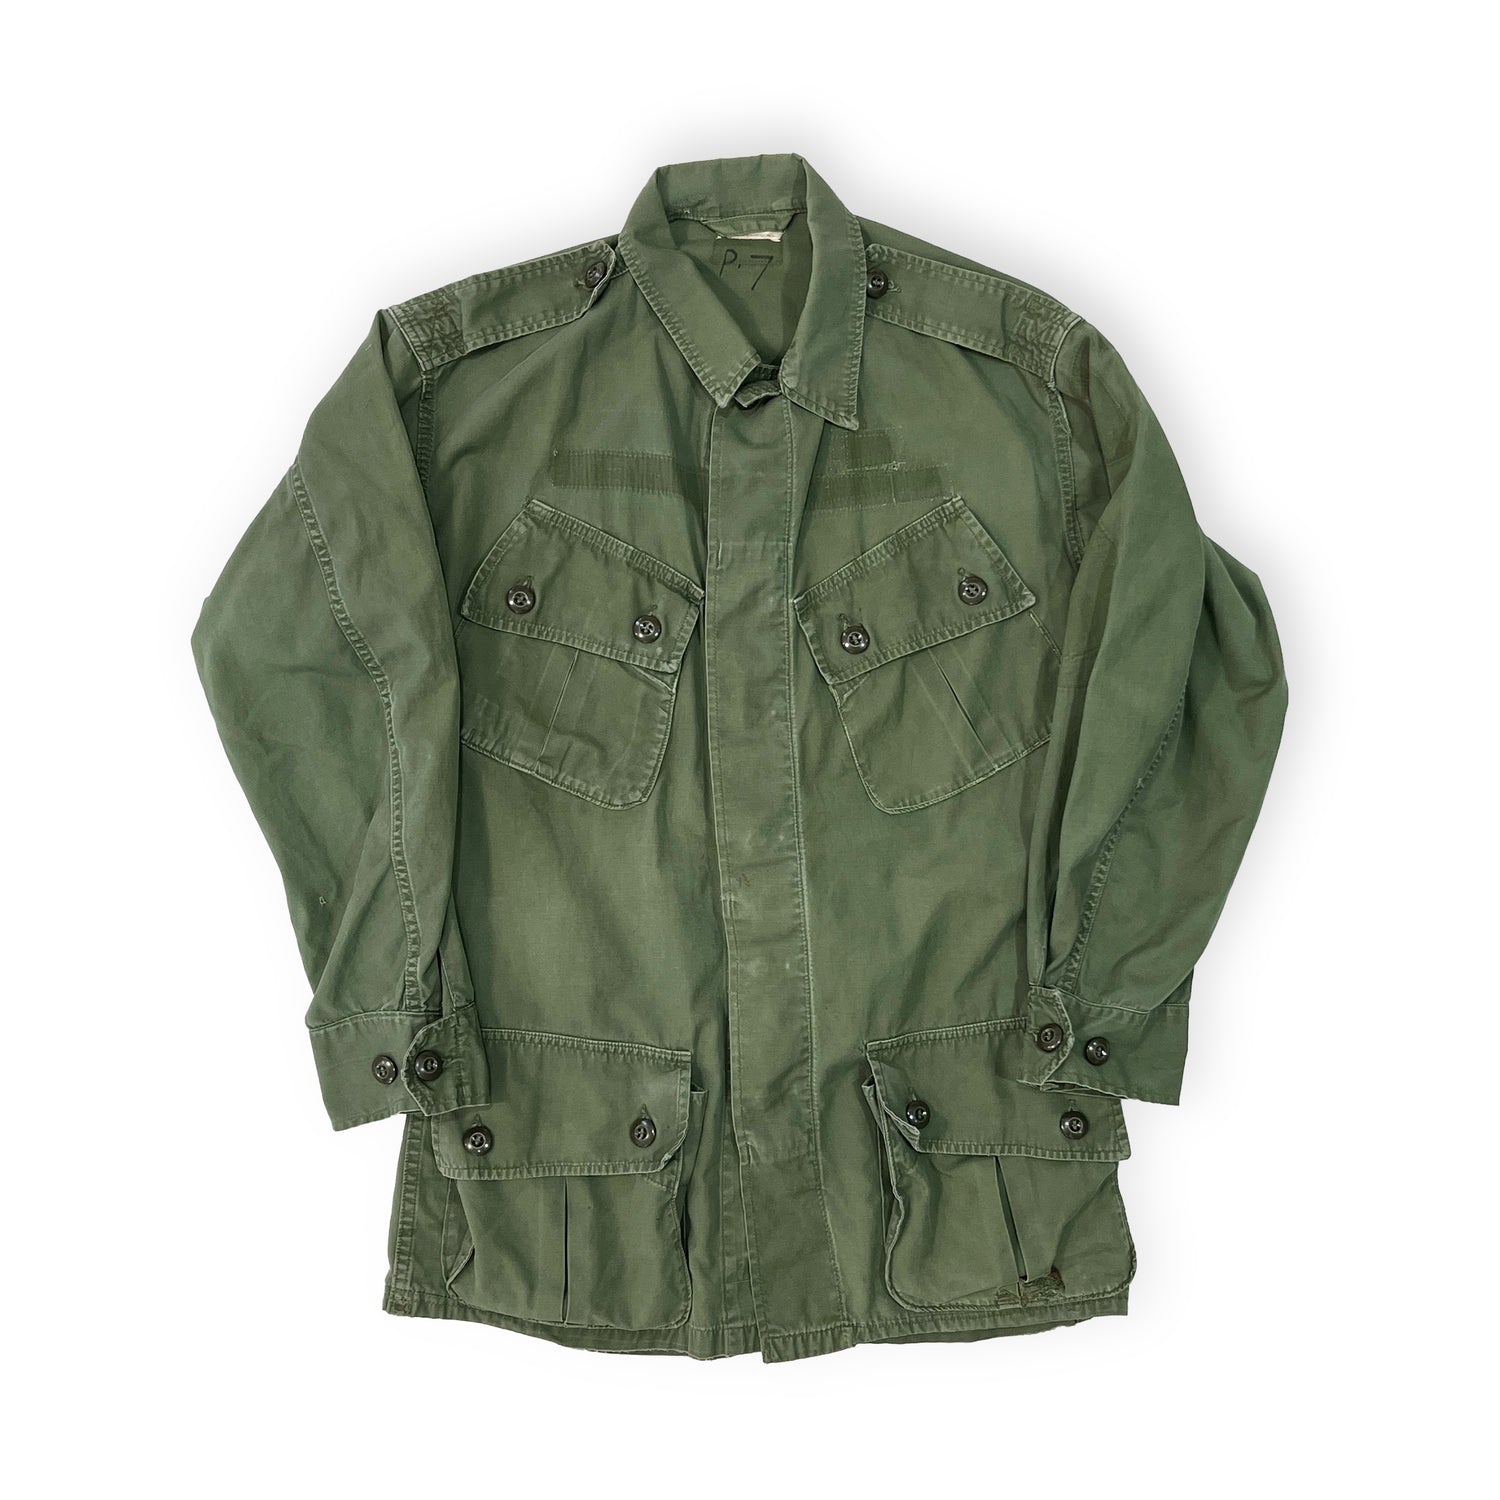 63's U.S.ARMY ジャングルファティーグJKT 1st TYPE Size (S-R)